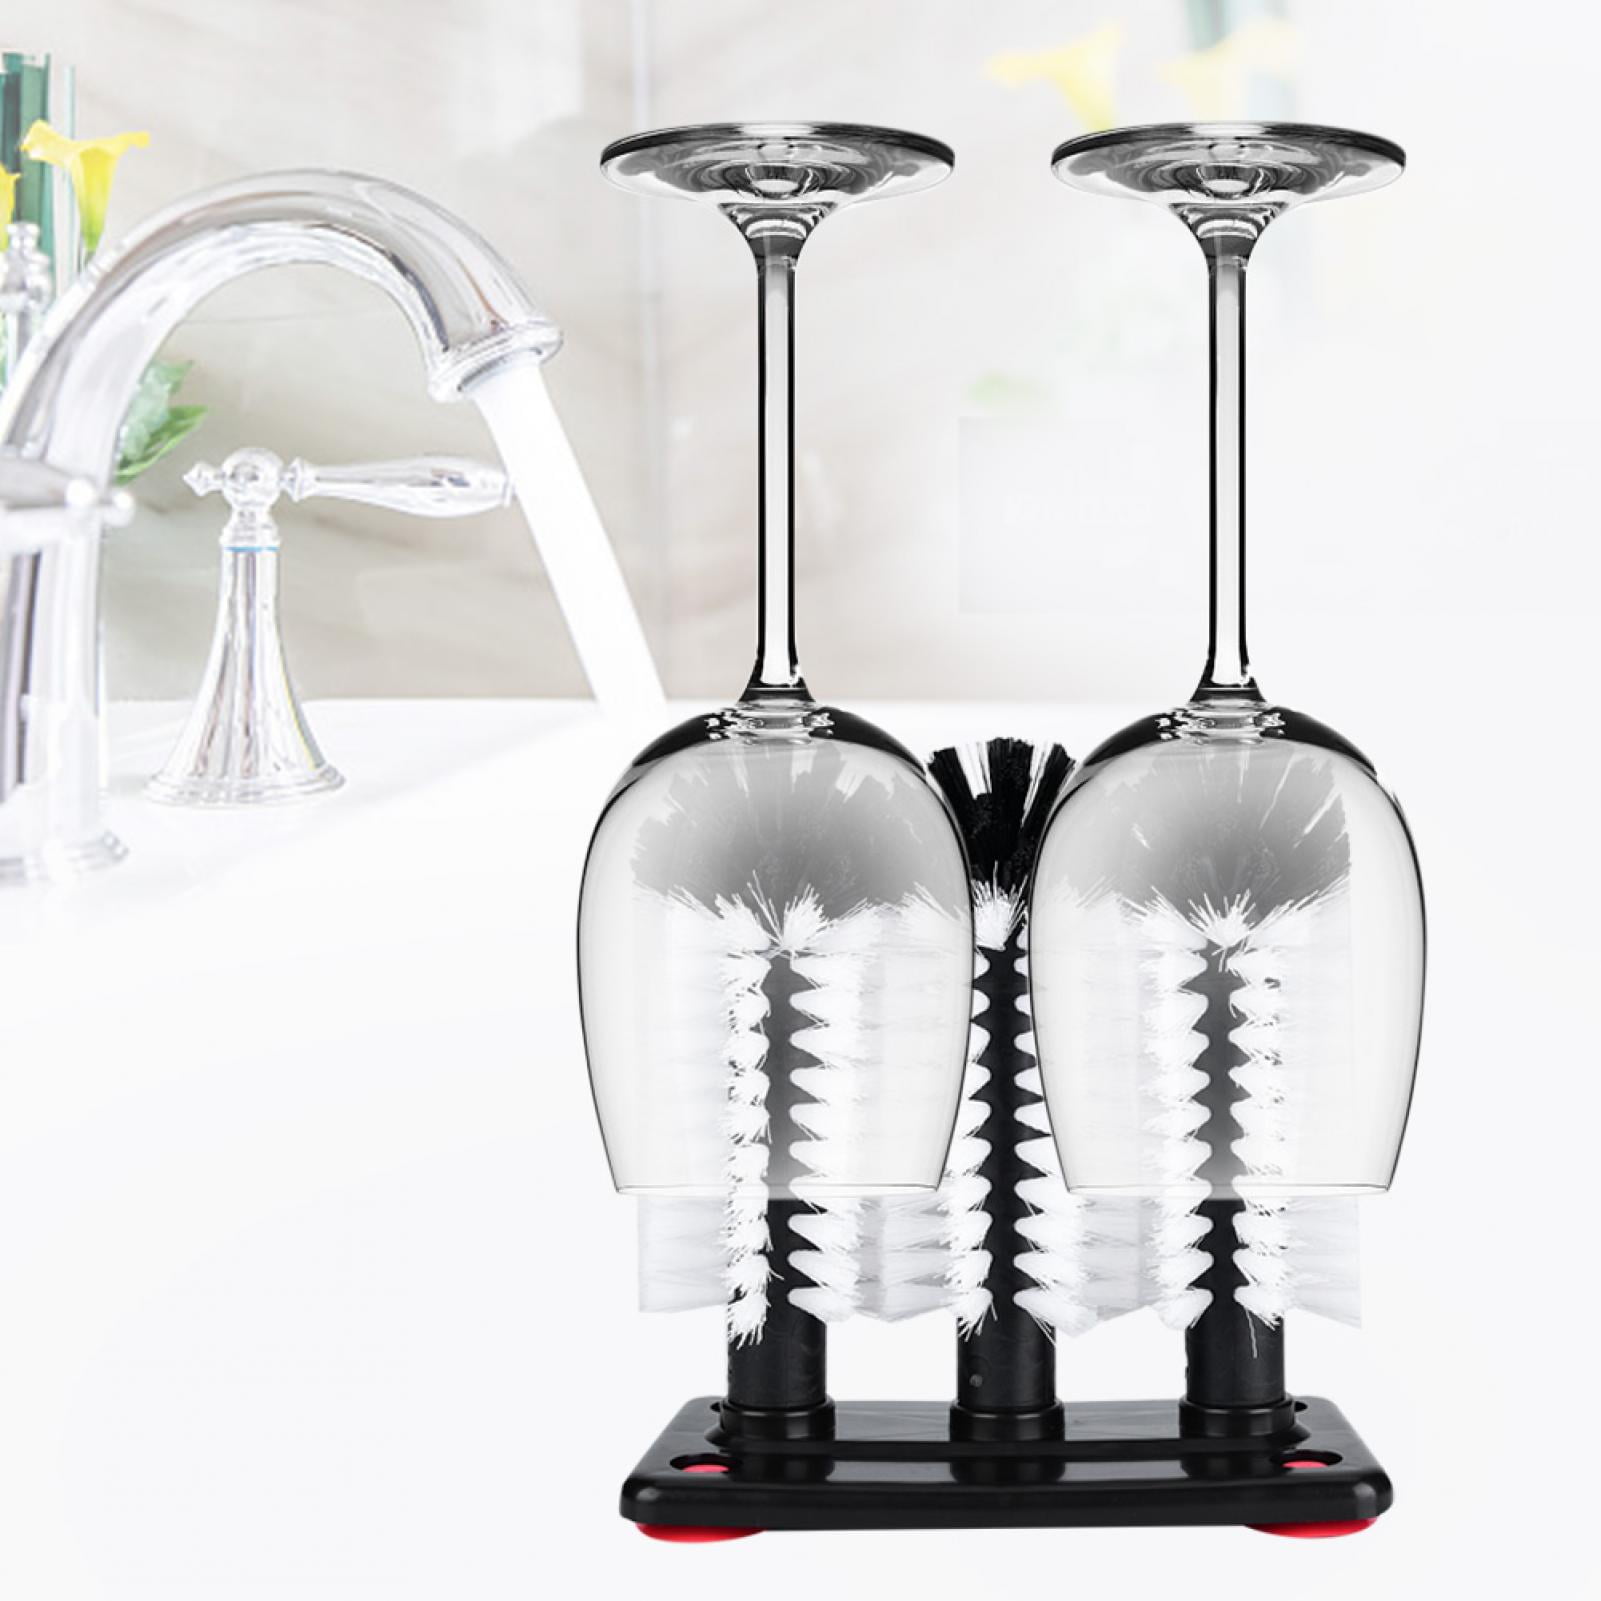 3 Brushes Bar Glass Cups Washer for Sink with Suction Cup Base Coffee Bar Supplies Cup Brush Glass Cup Brush 